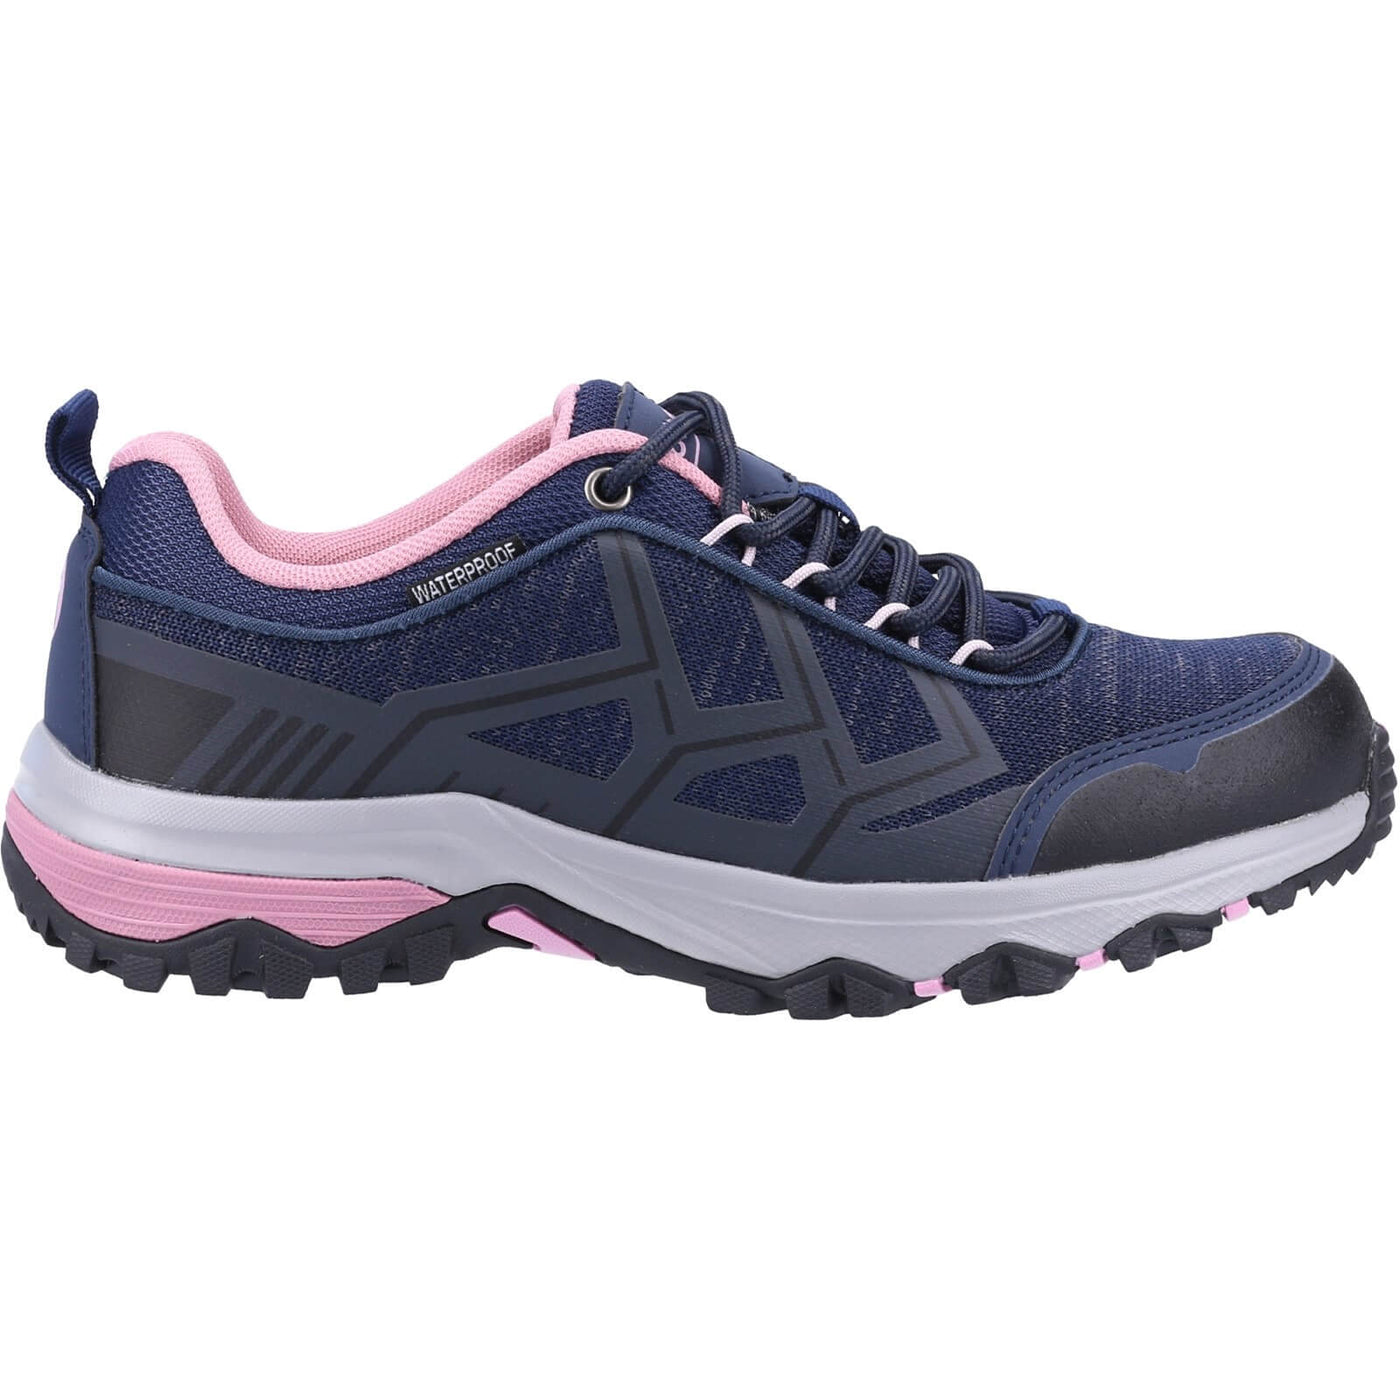 Cotswold Wychwood Low Waterproof Walking Shoes Navy/Pink 4#colour_navy-blue-pink